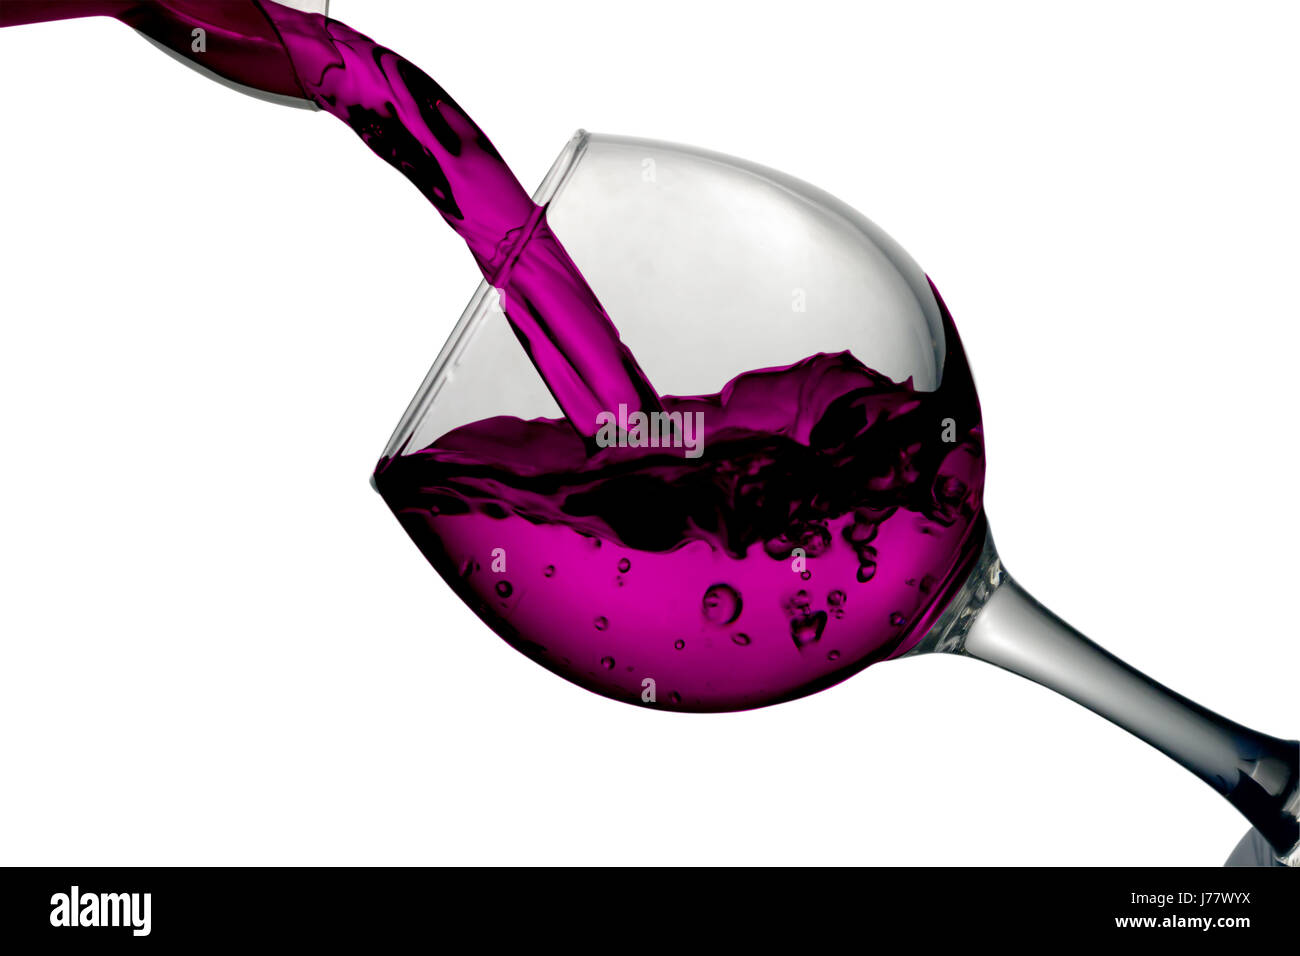 Red liquid, water, cherry juice, strawberry juice, red wine pouring into a glass, liquid in a speaker, isolated on a white background Stock Photo